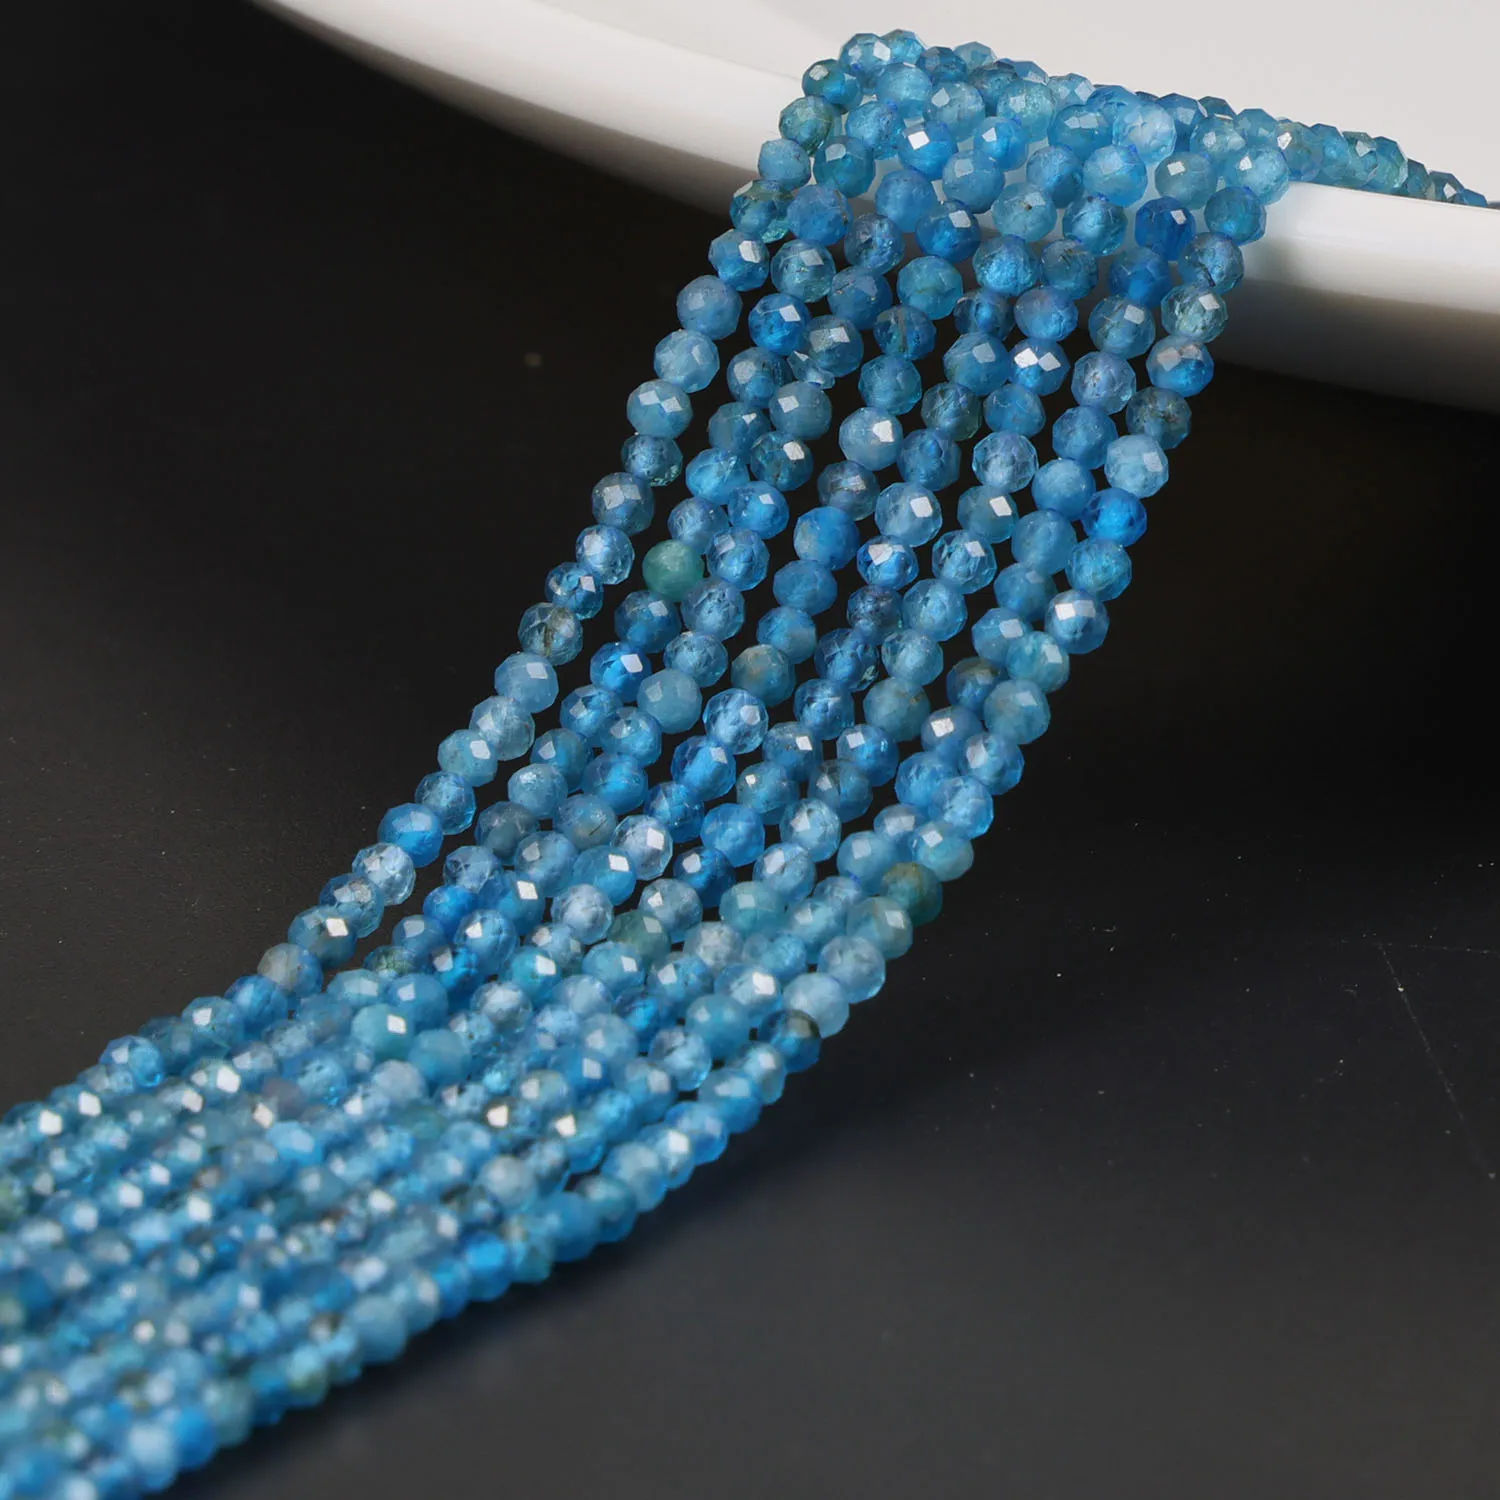 

Natural Blue Apatite 2 3 4mm Round Faceted Gemstone Loose Beads Accessories for DIY Jewelry Necklace Bracelet Earring Making